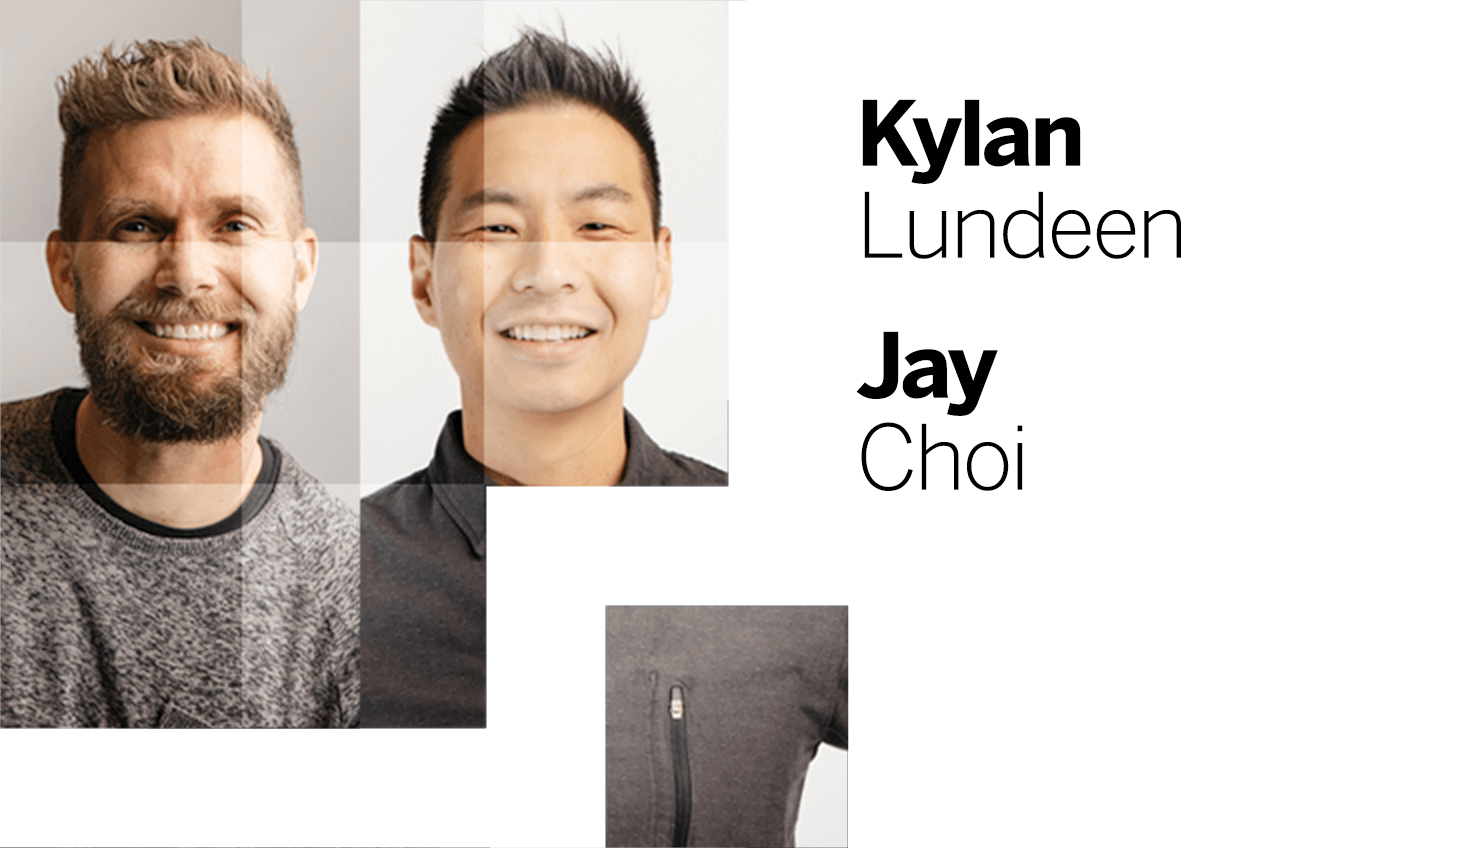 Jay Choi and Kylan Lundeen